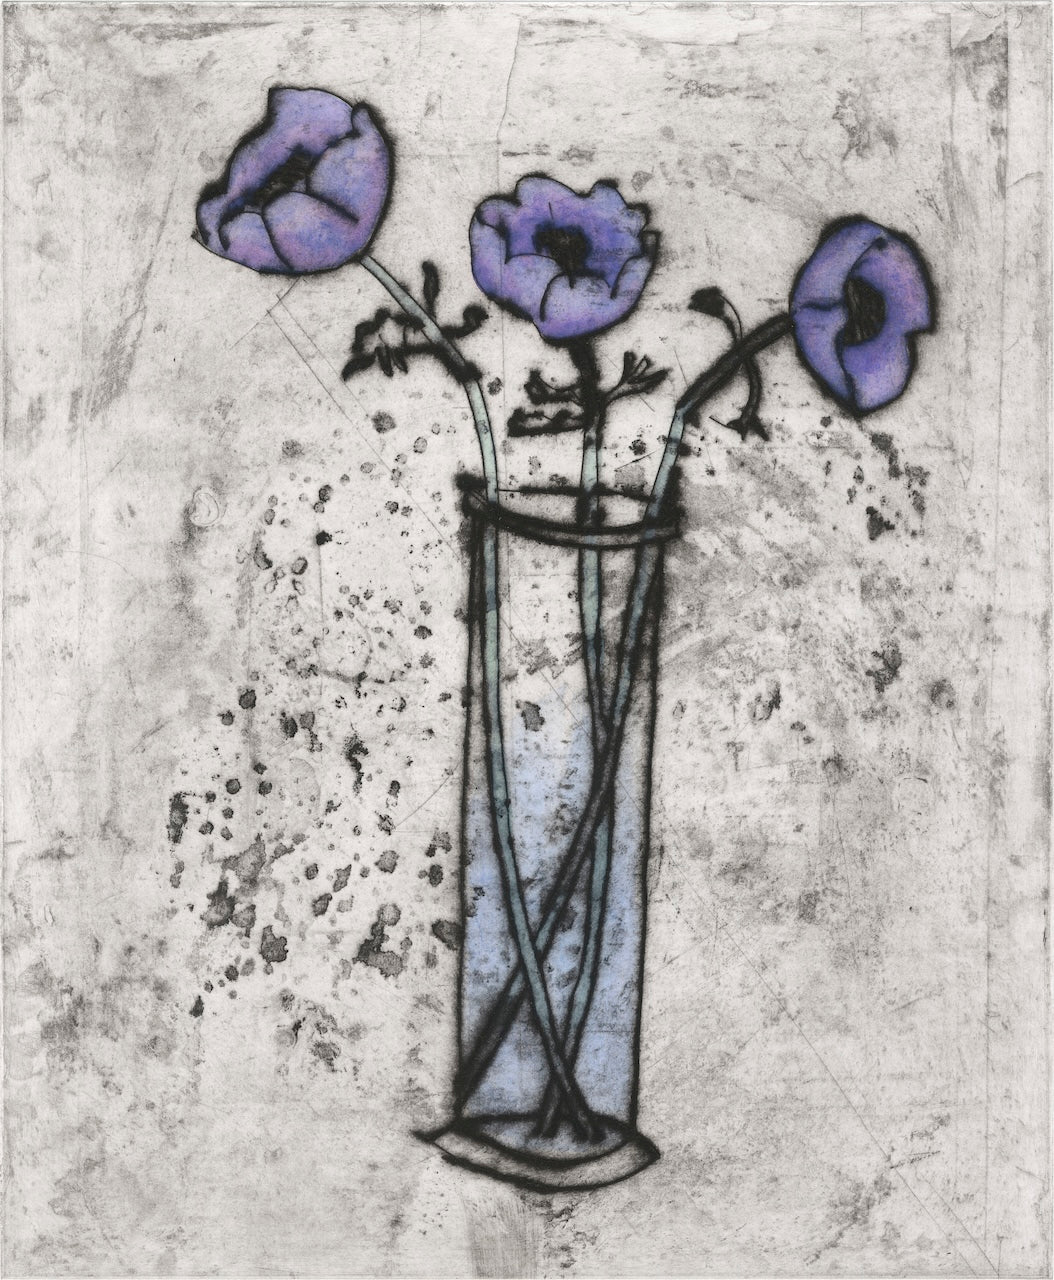 Anemones - Limited Edition drypoint and watercolour fine art print by artist Richard Spare